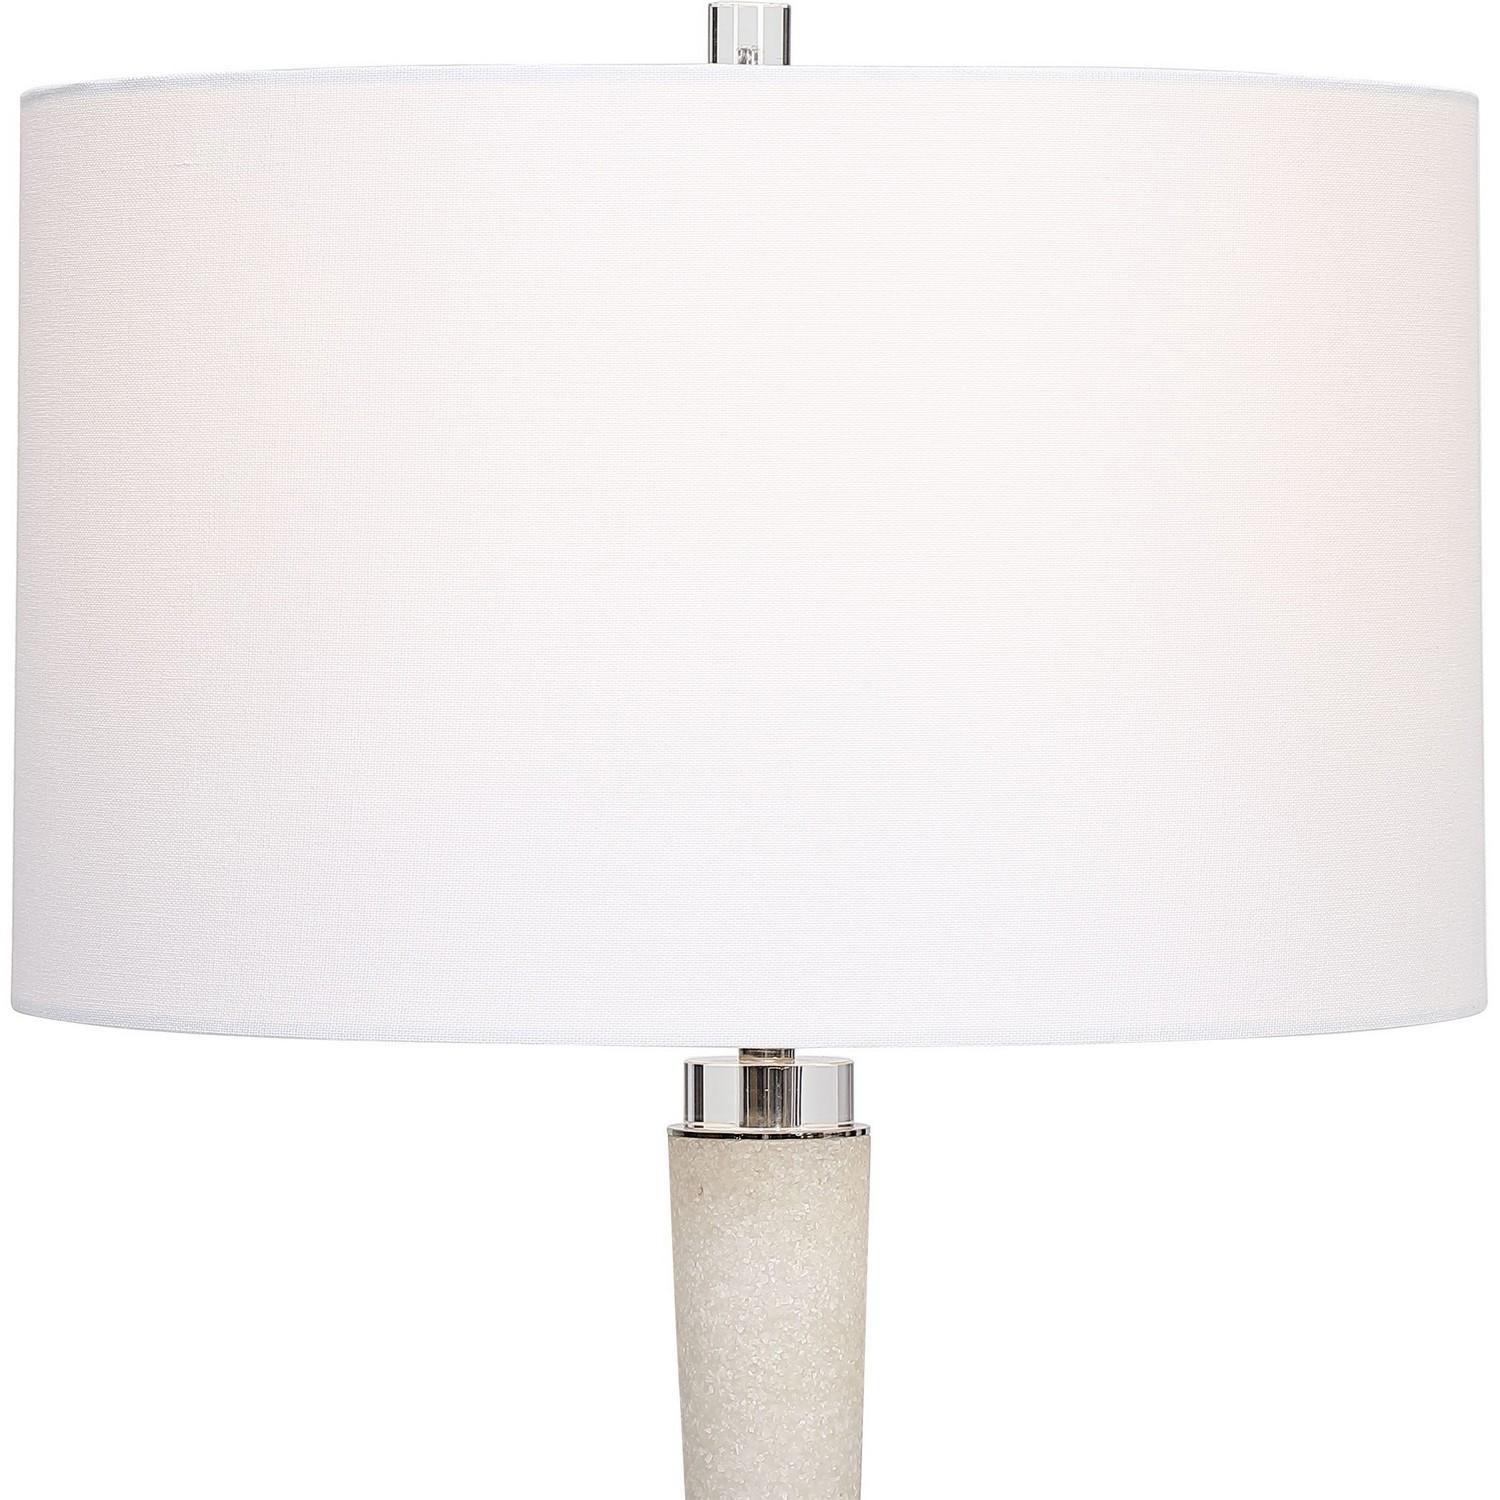 Uttermost Kently Marble Table Lamp - White